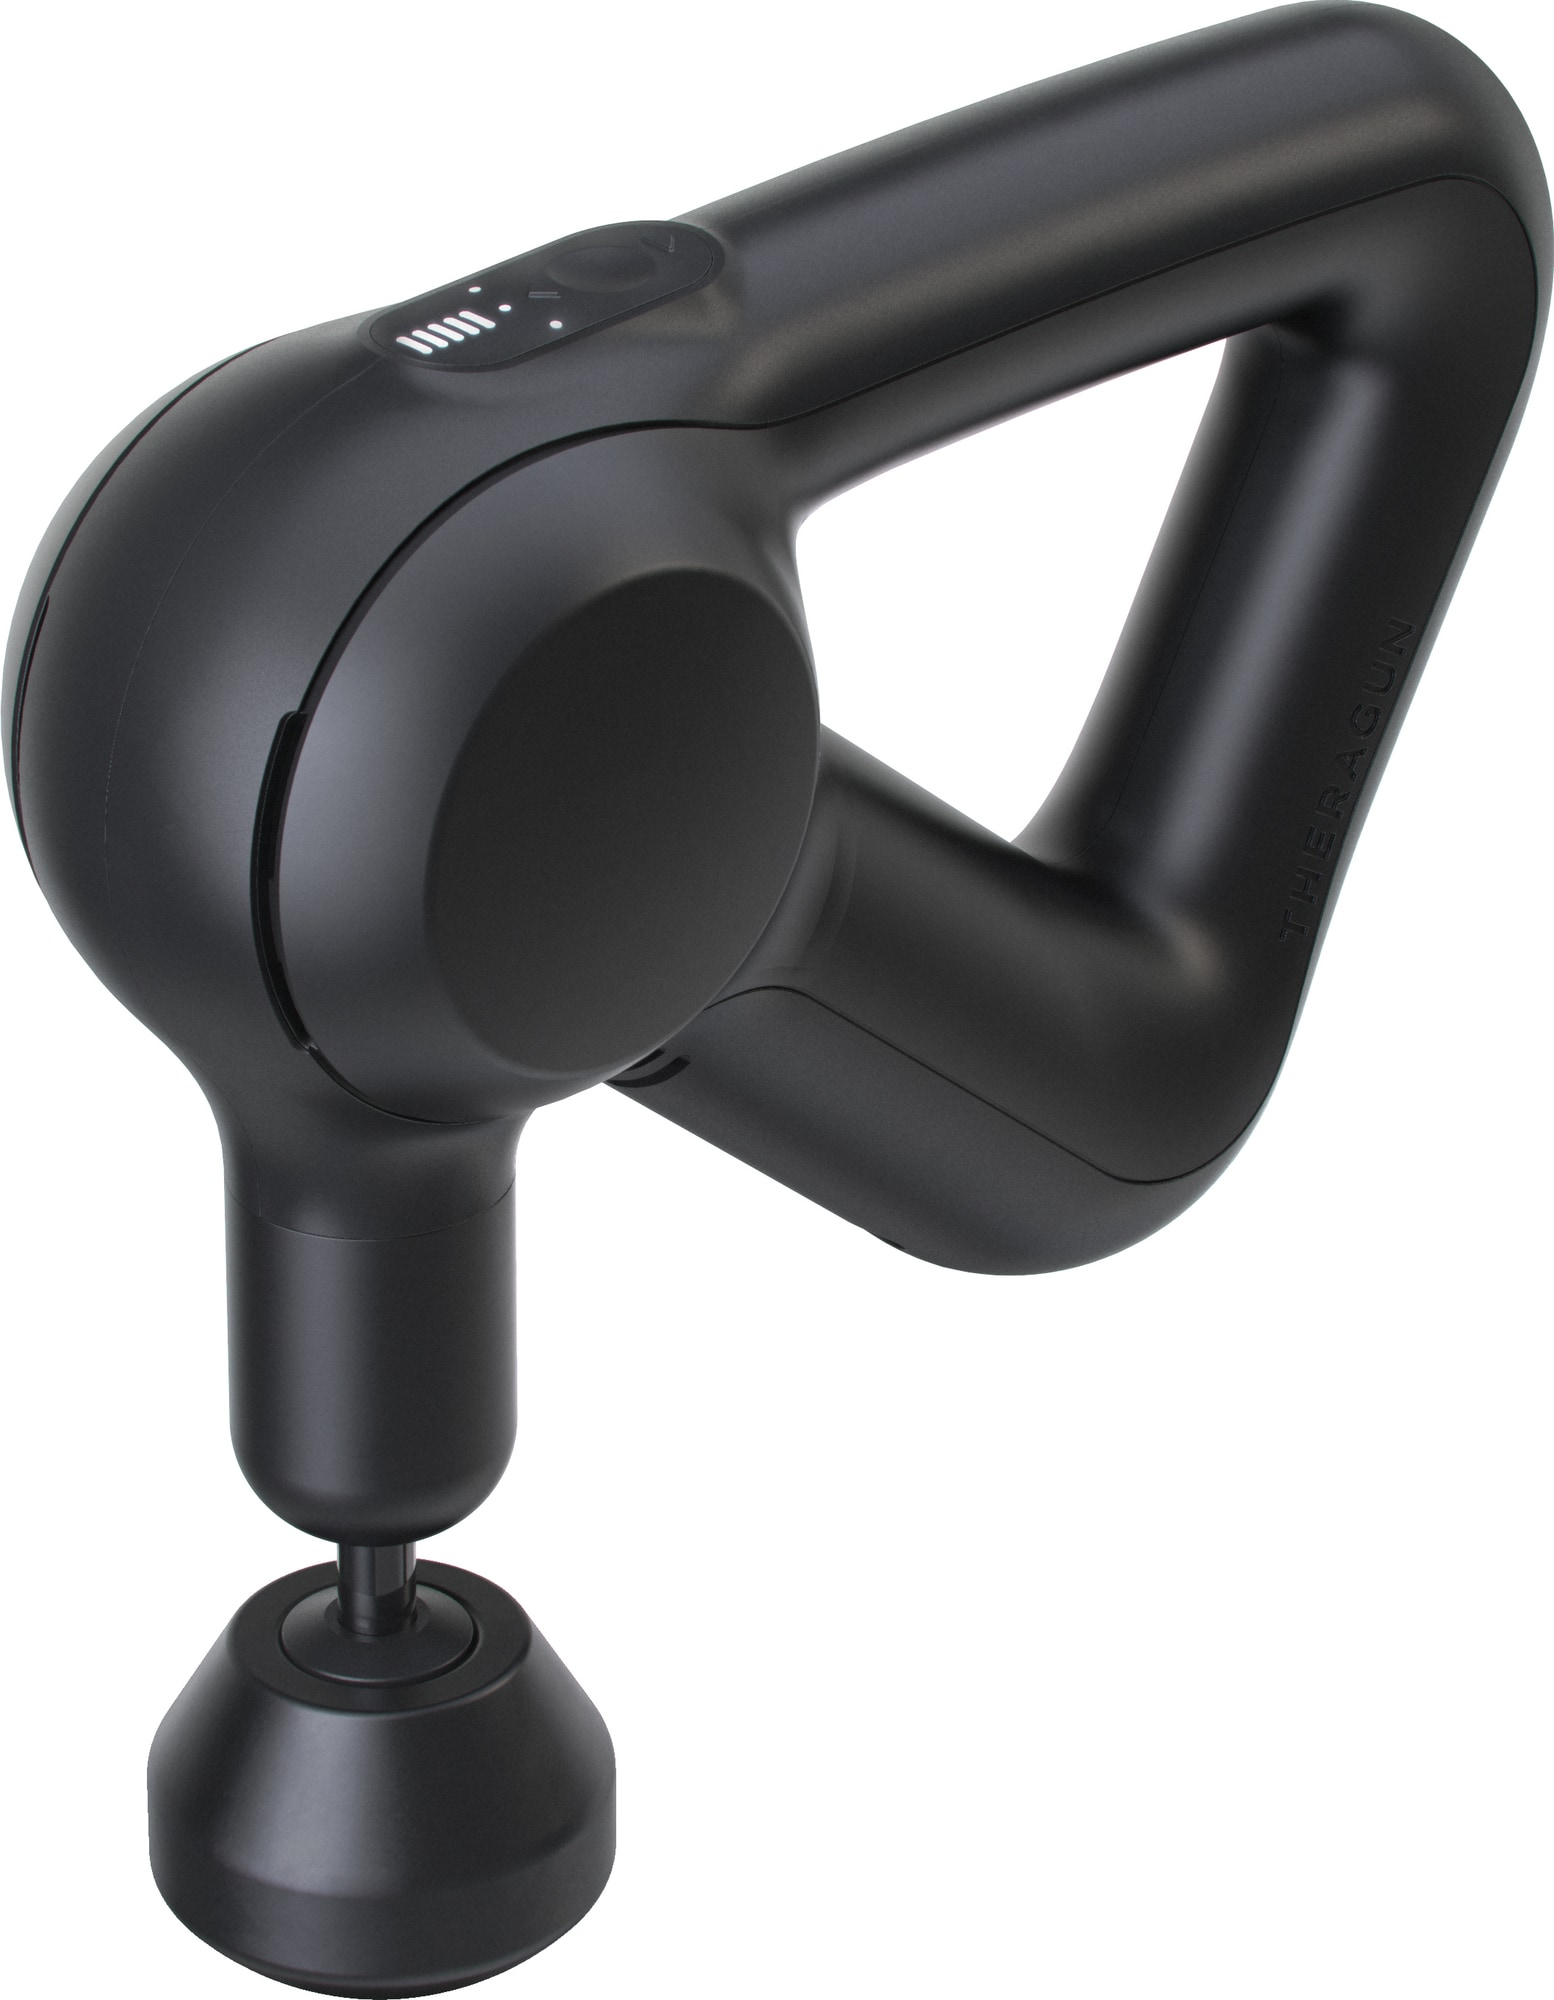 Theragun Prime 4th Gen Percussive Therapy Massager by Therabody